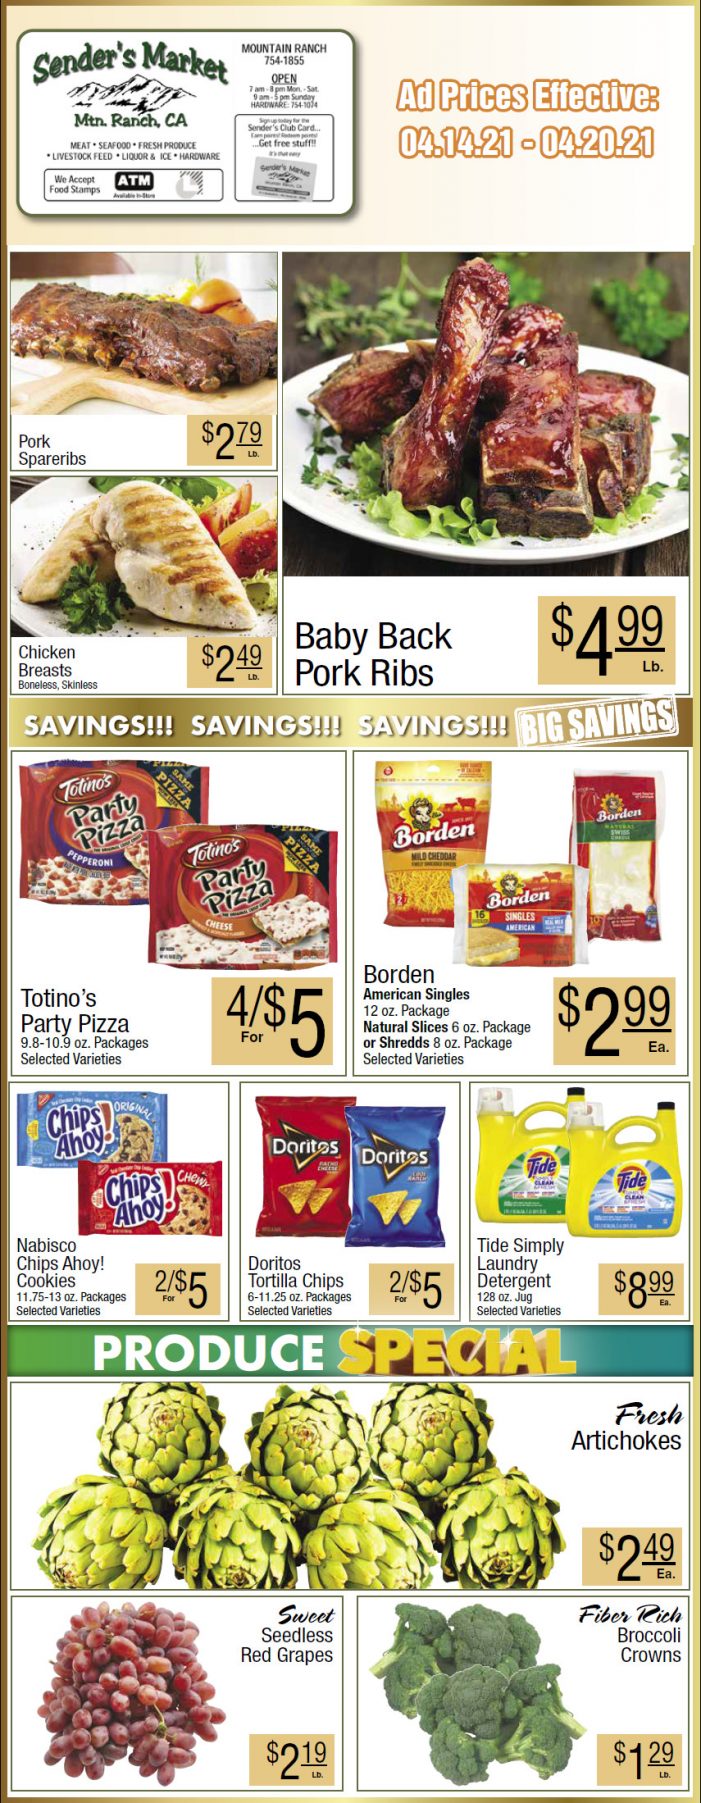 Sender’s Market’s Weekly Ad & Grocery Specials Through April 20th.  Shop Local & Save!